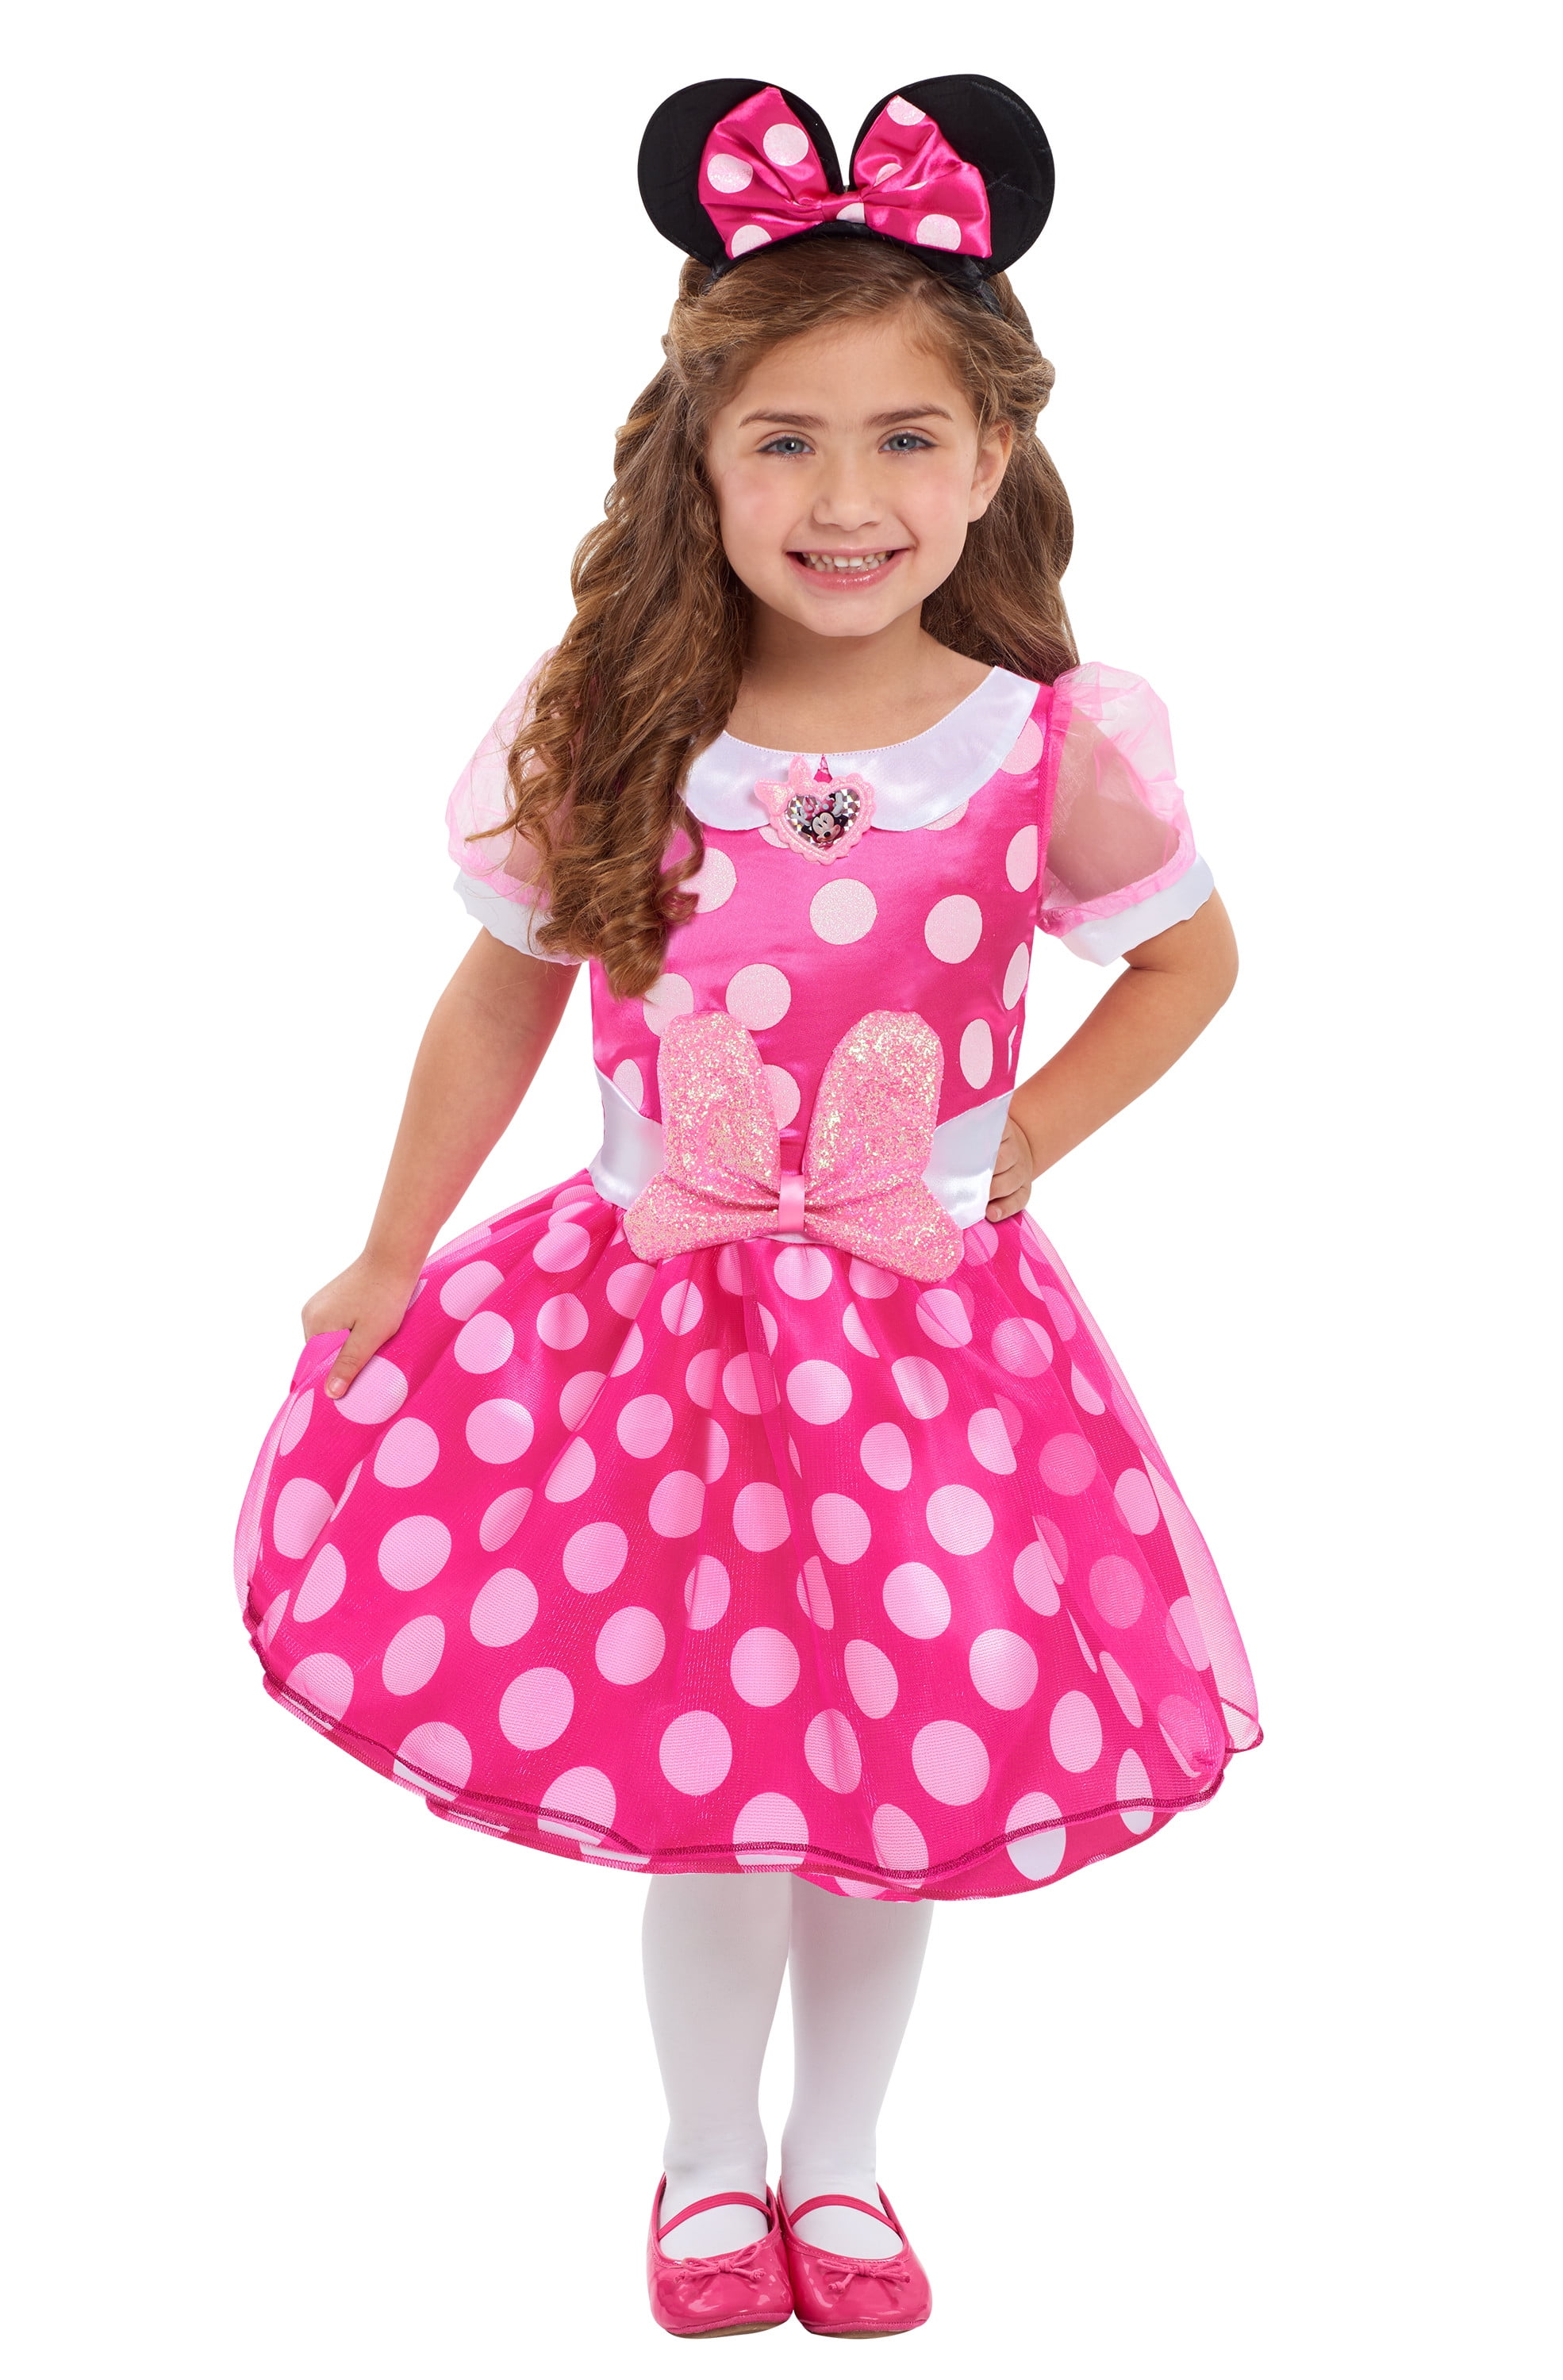 Minnie Mouse Bowdazzling Dress, Officially Licensed Kids Toys for Ages 3 Up, Gifts and Presents - 1